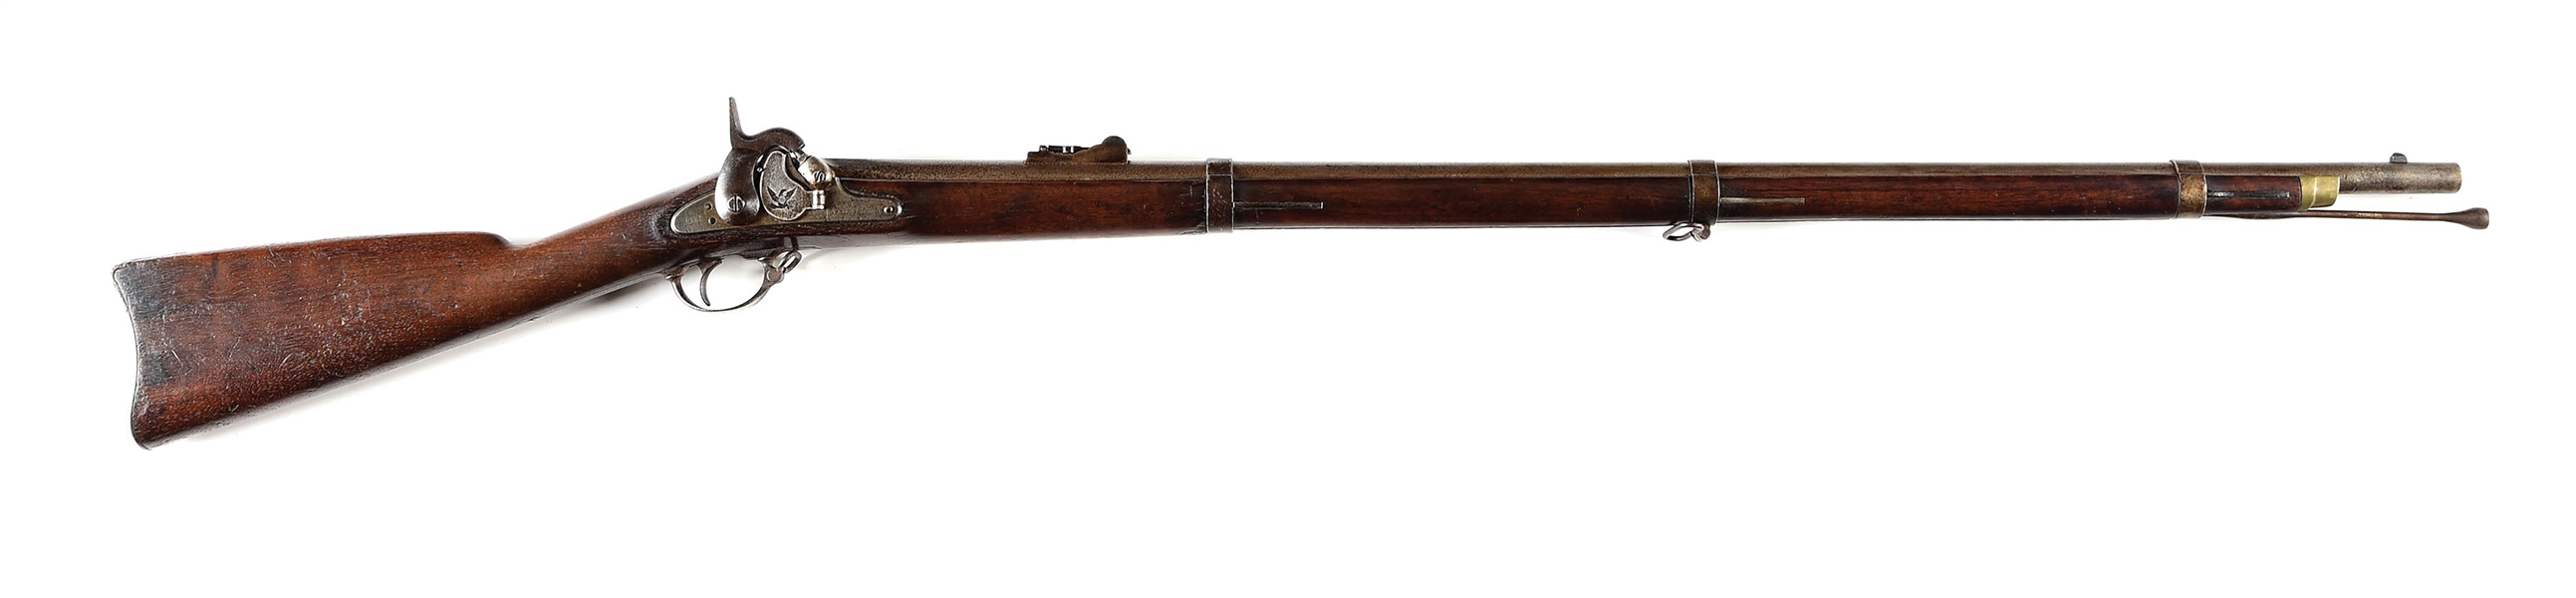 (A) U.S. SPRINGFIELD MODEL 1855 RIFLED PERCUSSION MUSKET.